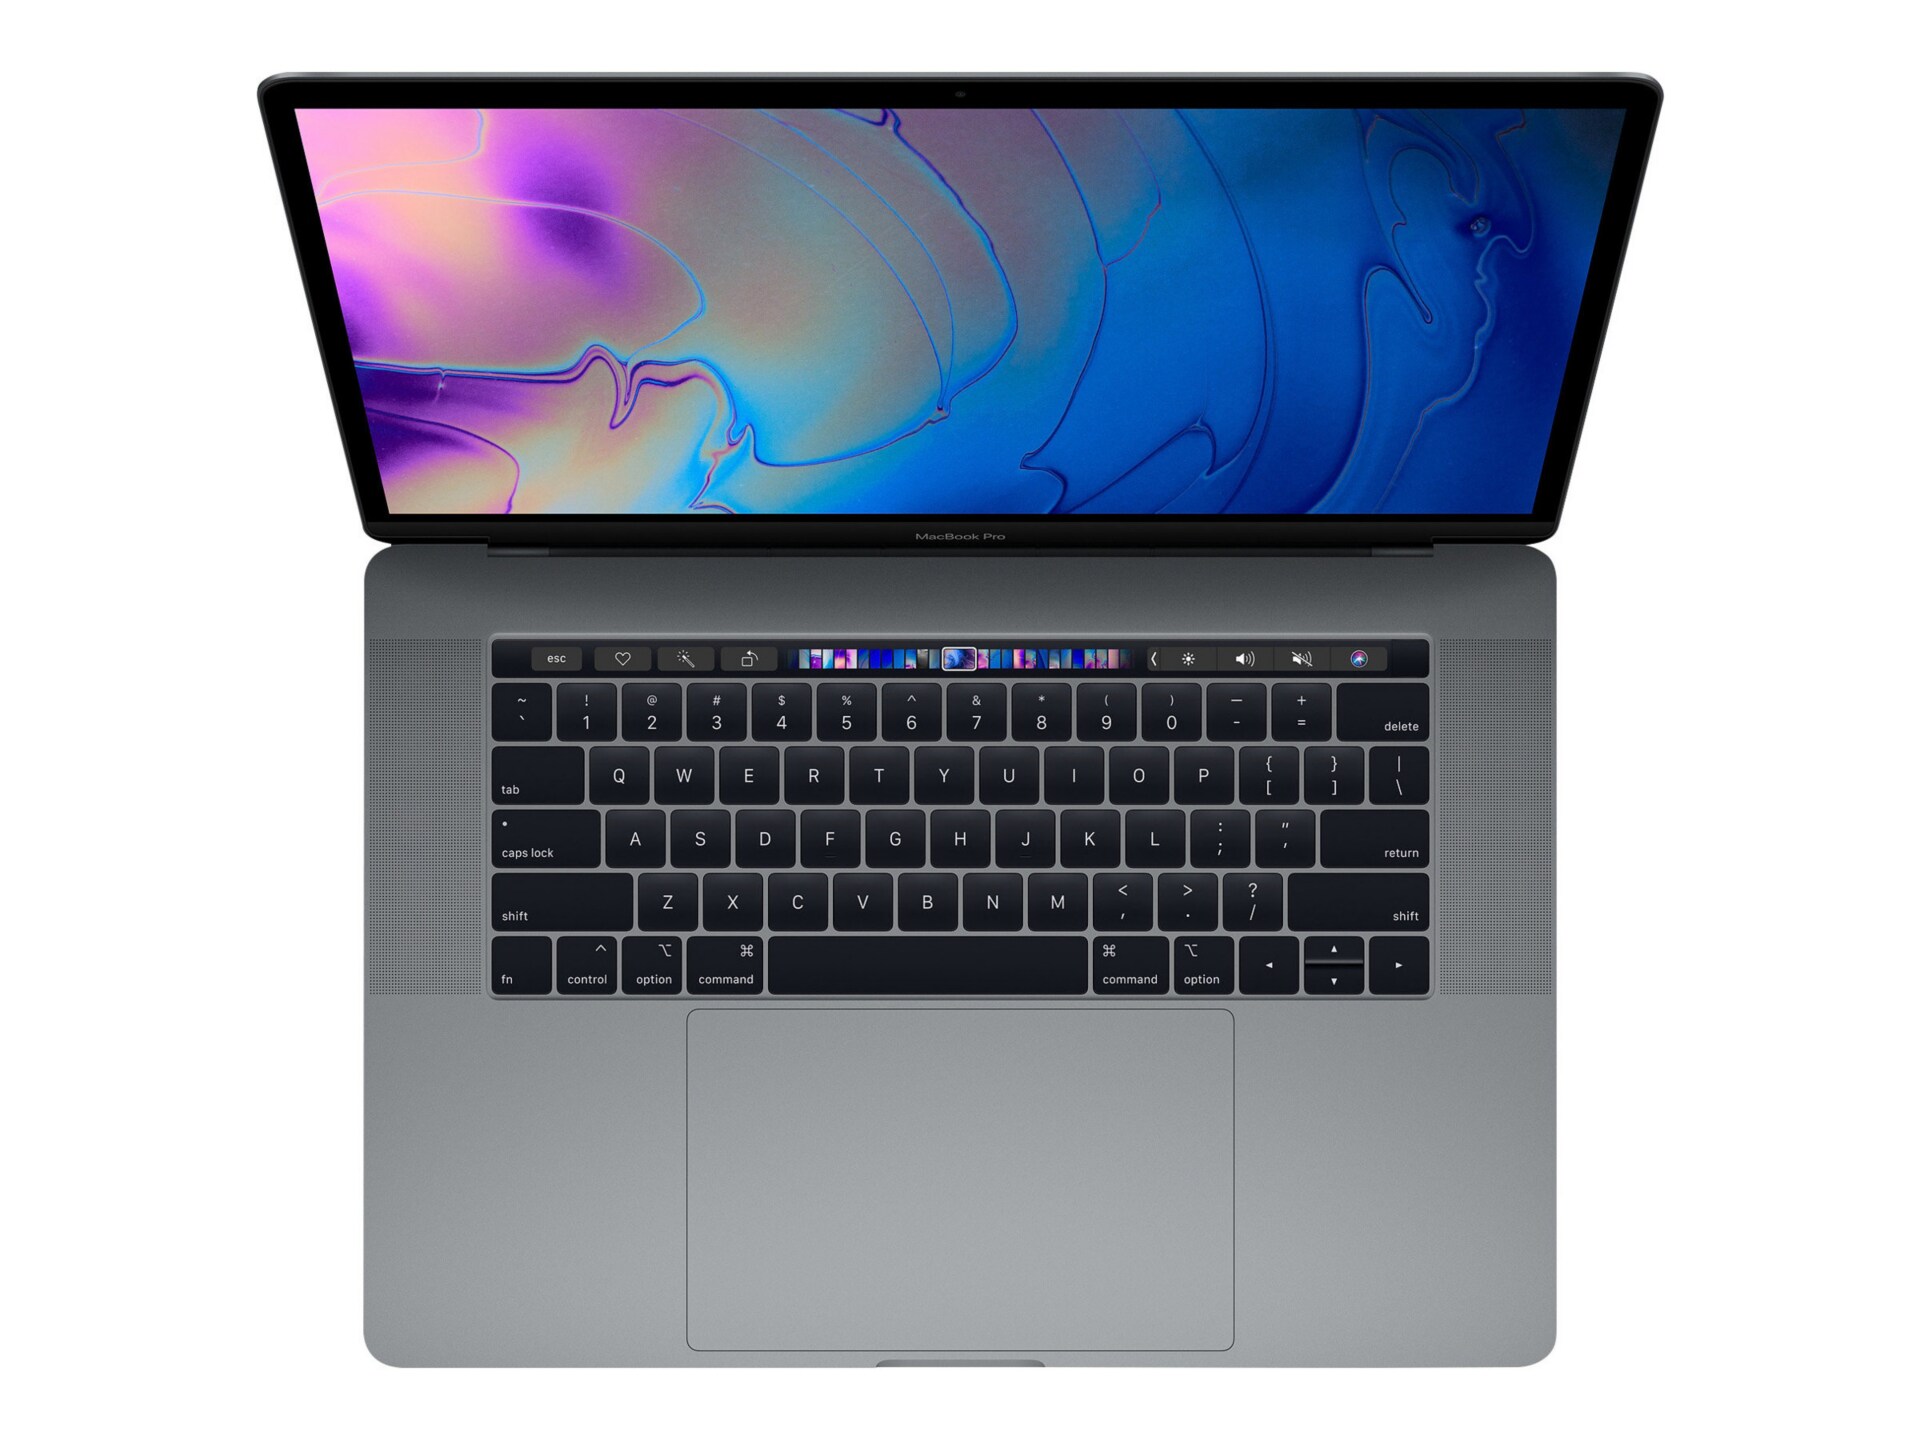 Apple MacBook Pro with Touch Bar - 15.4" - Core i7 - 16 GB RAM - 256 GB SSD - US